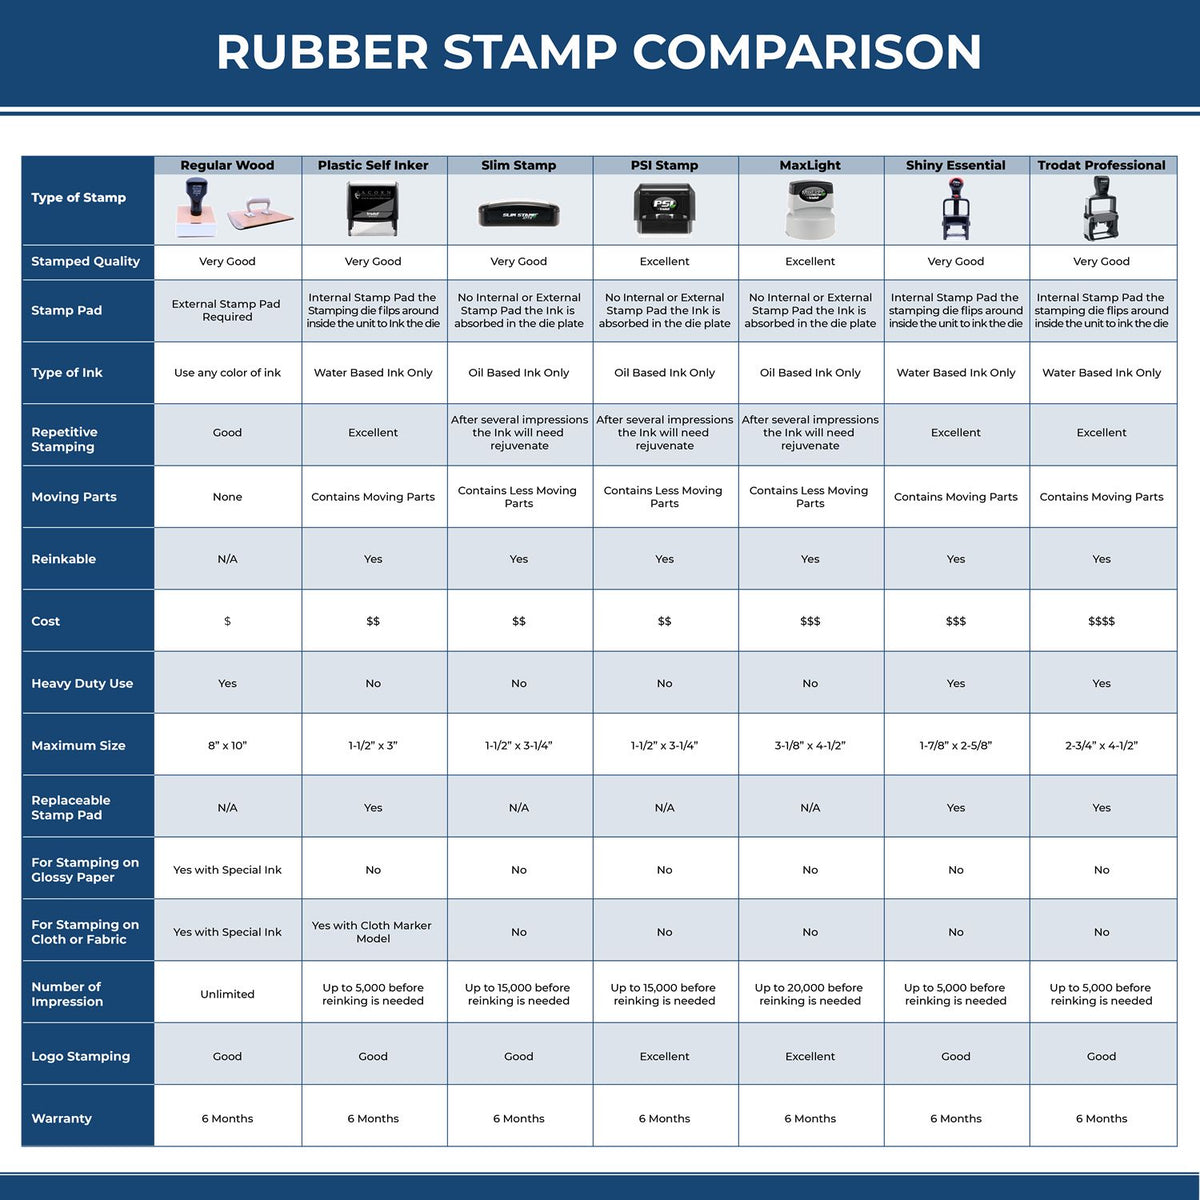 A comparison chart for the different types of mount models available for the Self-Inking Vermont PE Stamp.